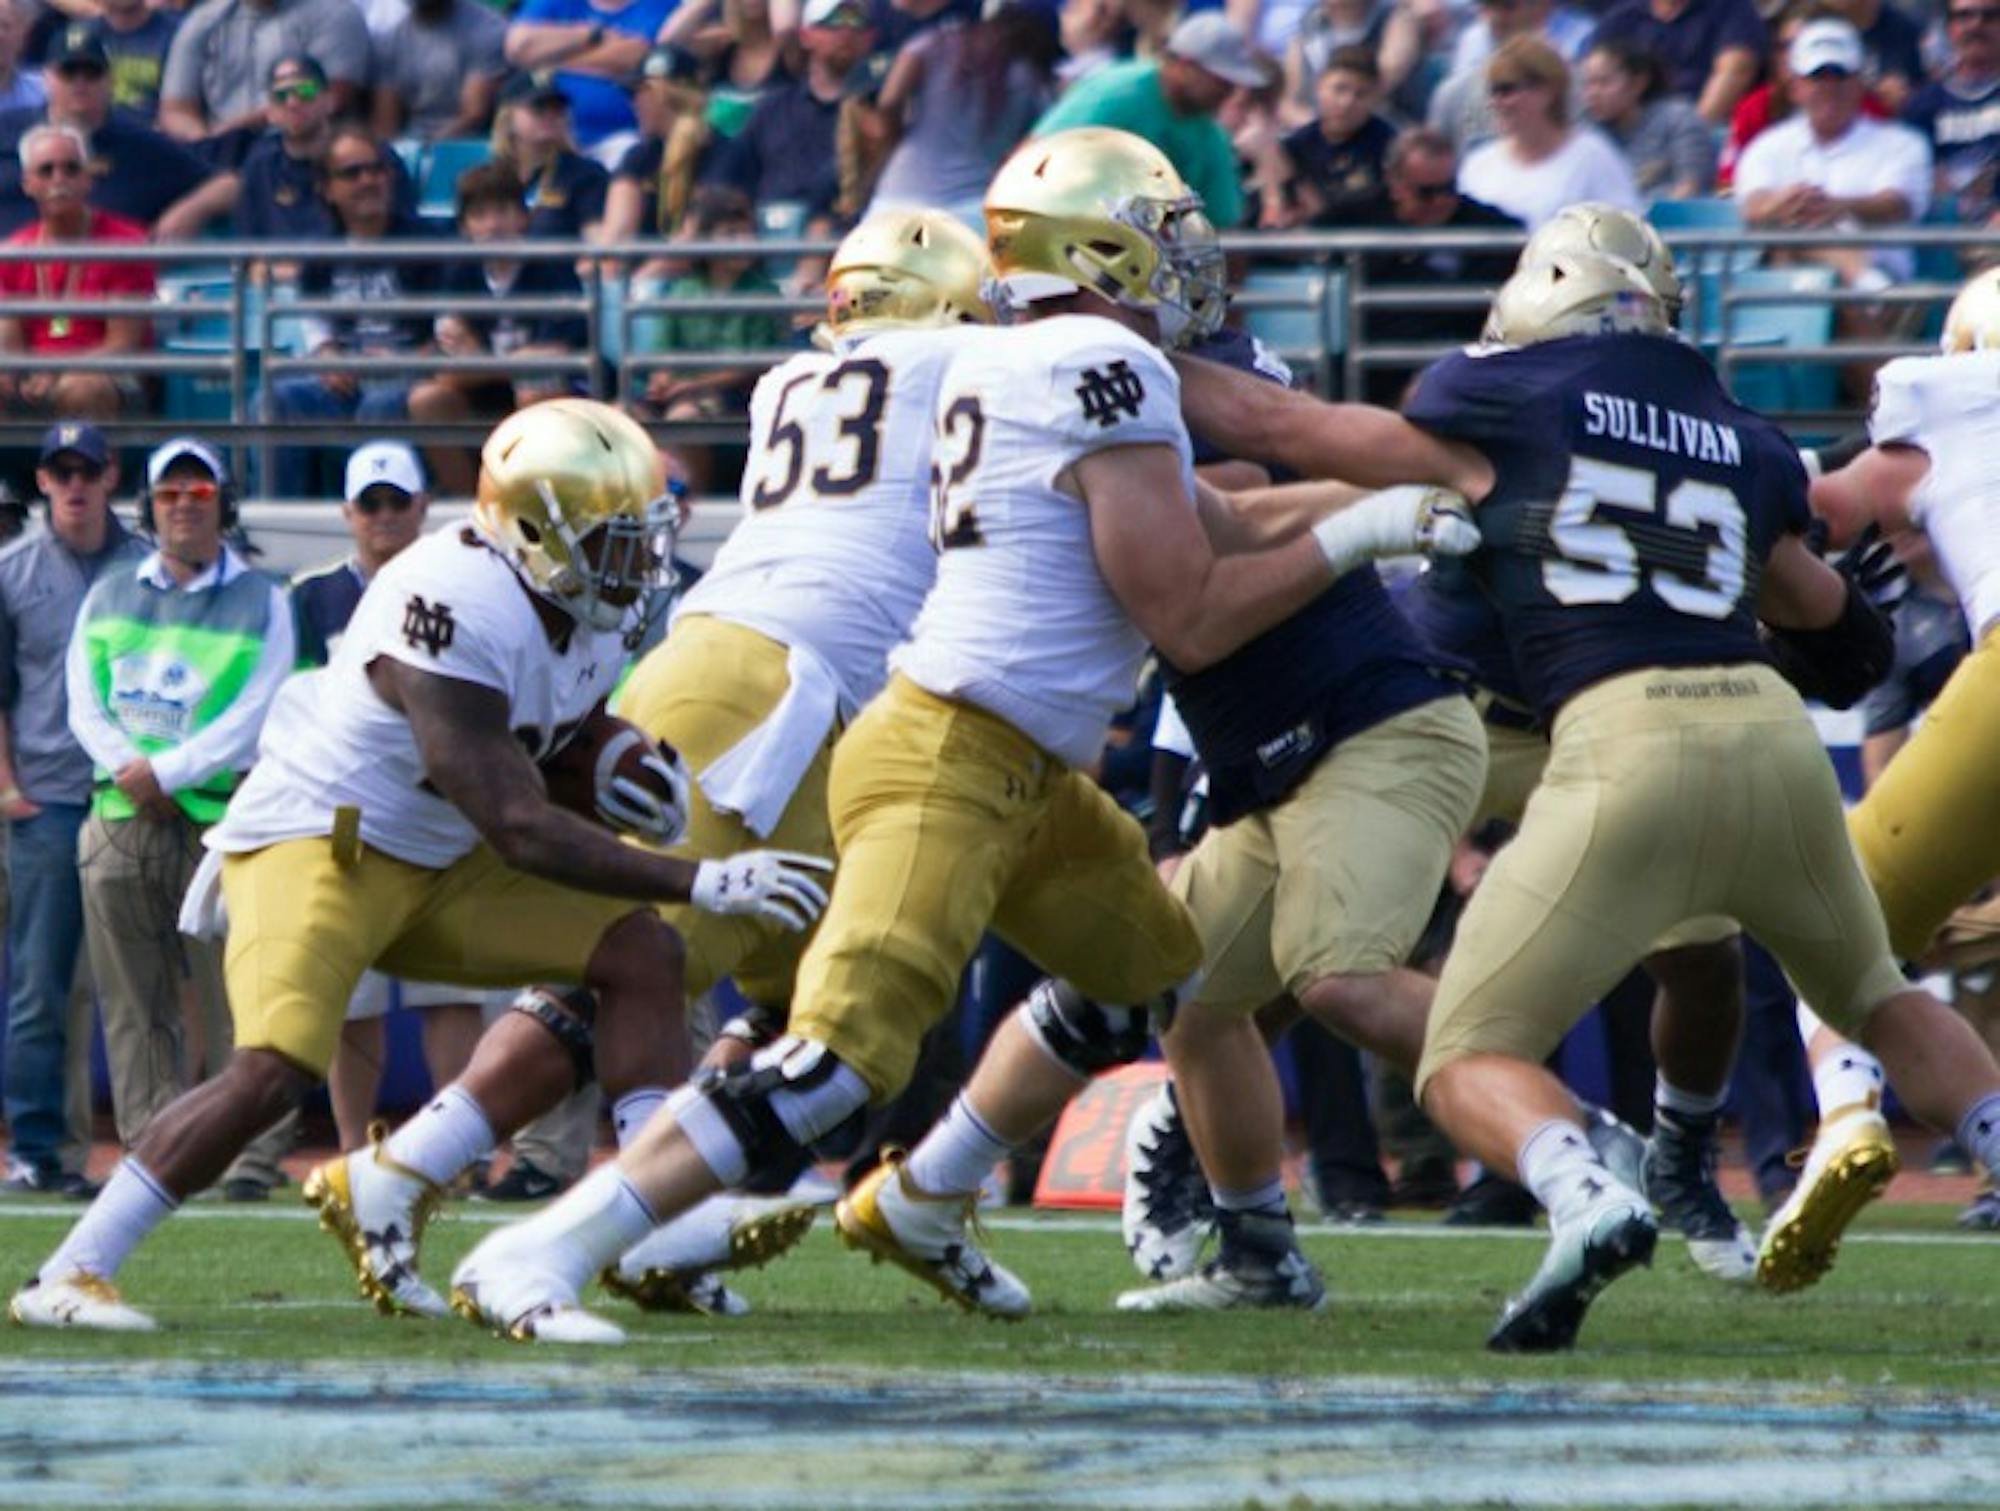 Irish senior offensive lineman Colin McGovern, front, engages a Navy defender during Notre Dame’s loss to the Midshipmen on Nov. 5. McGovern announced he will transfer to Virginia for his final season of eligibility after graduating from the University in May.